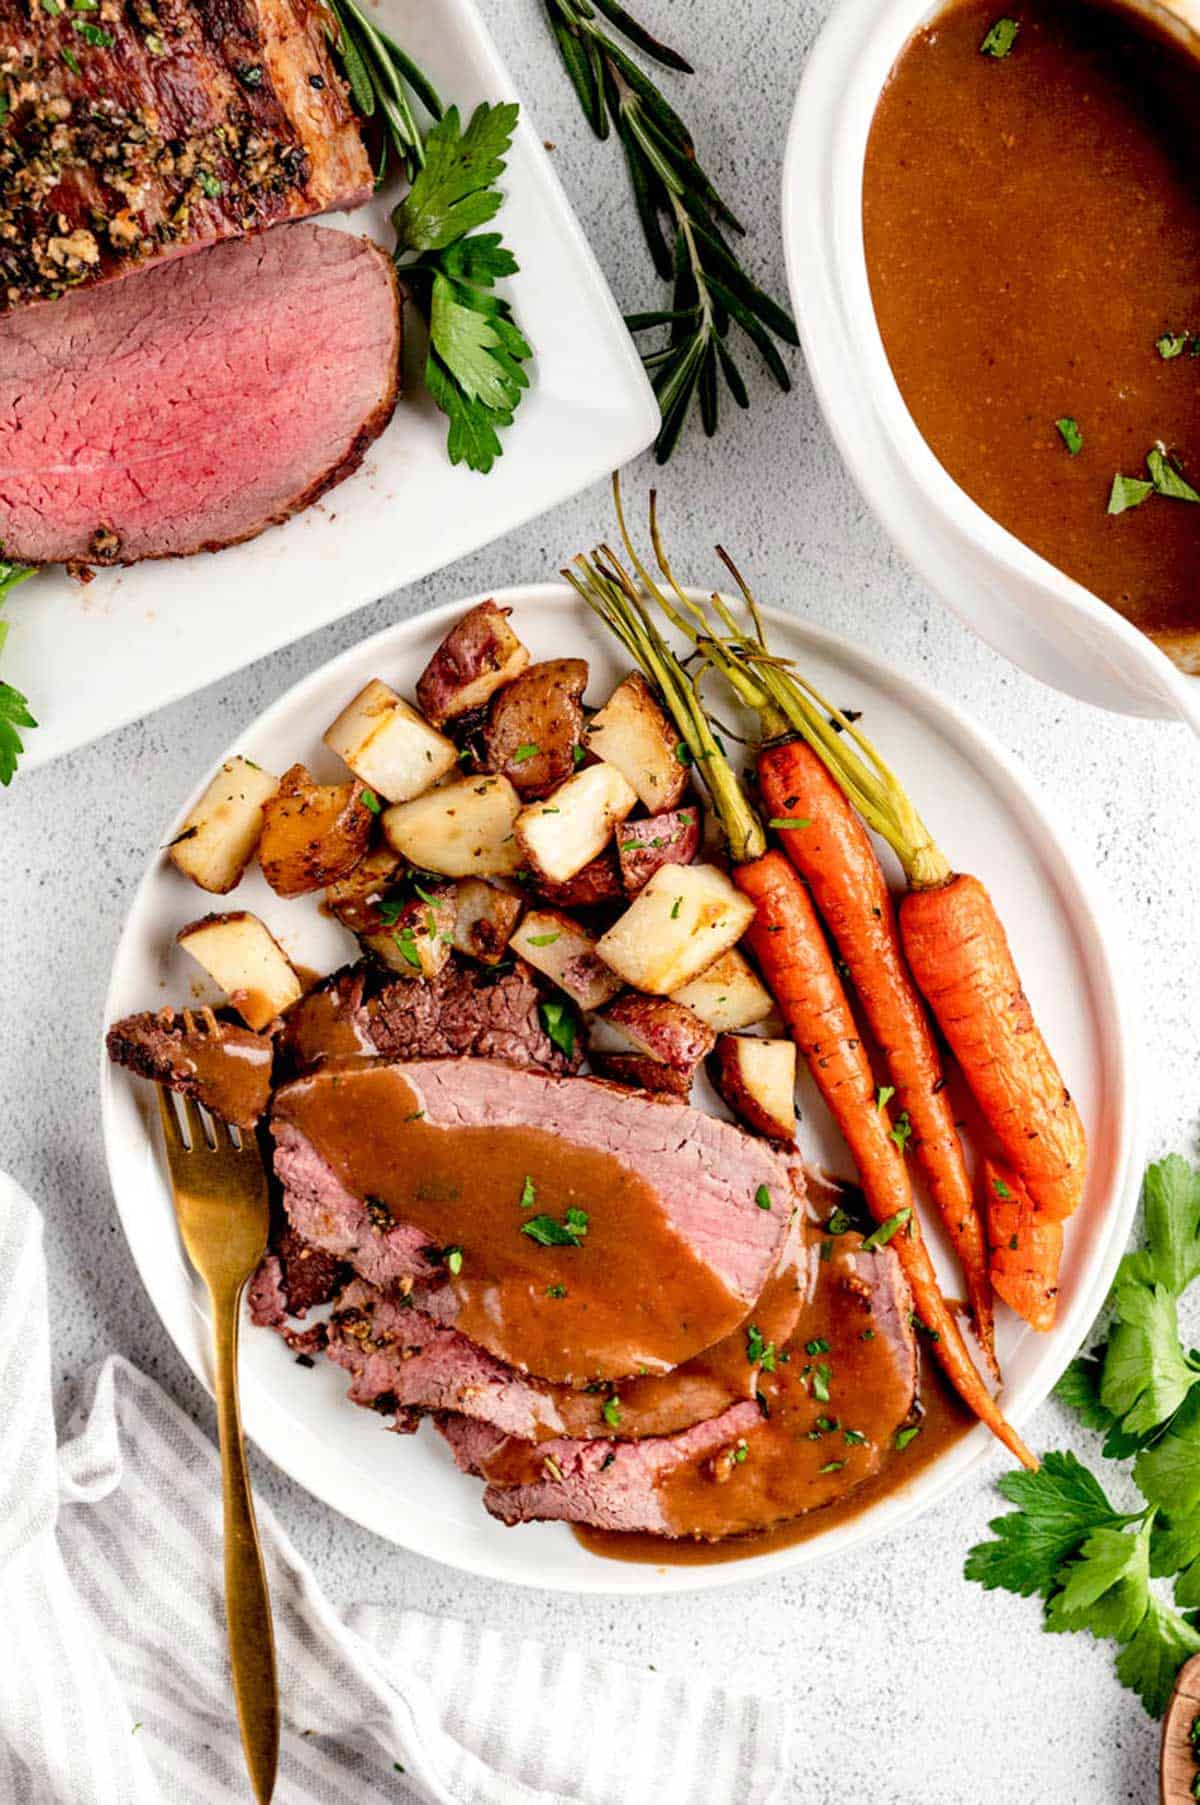 A plate showing a serving of Christmas roast beef with gravy, potatoes and carrots.